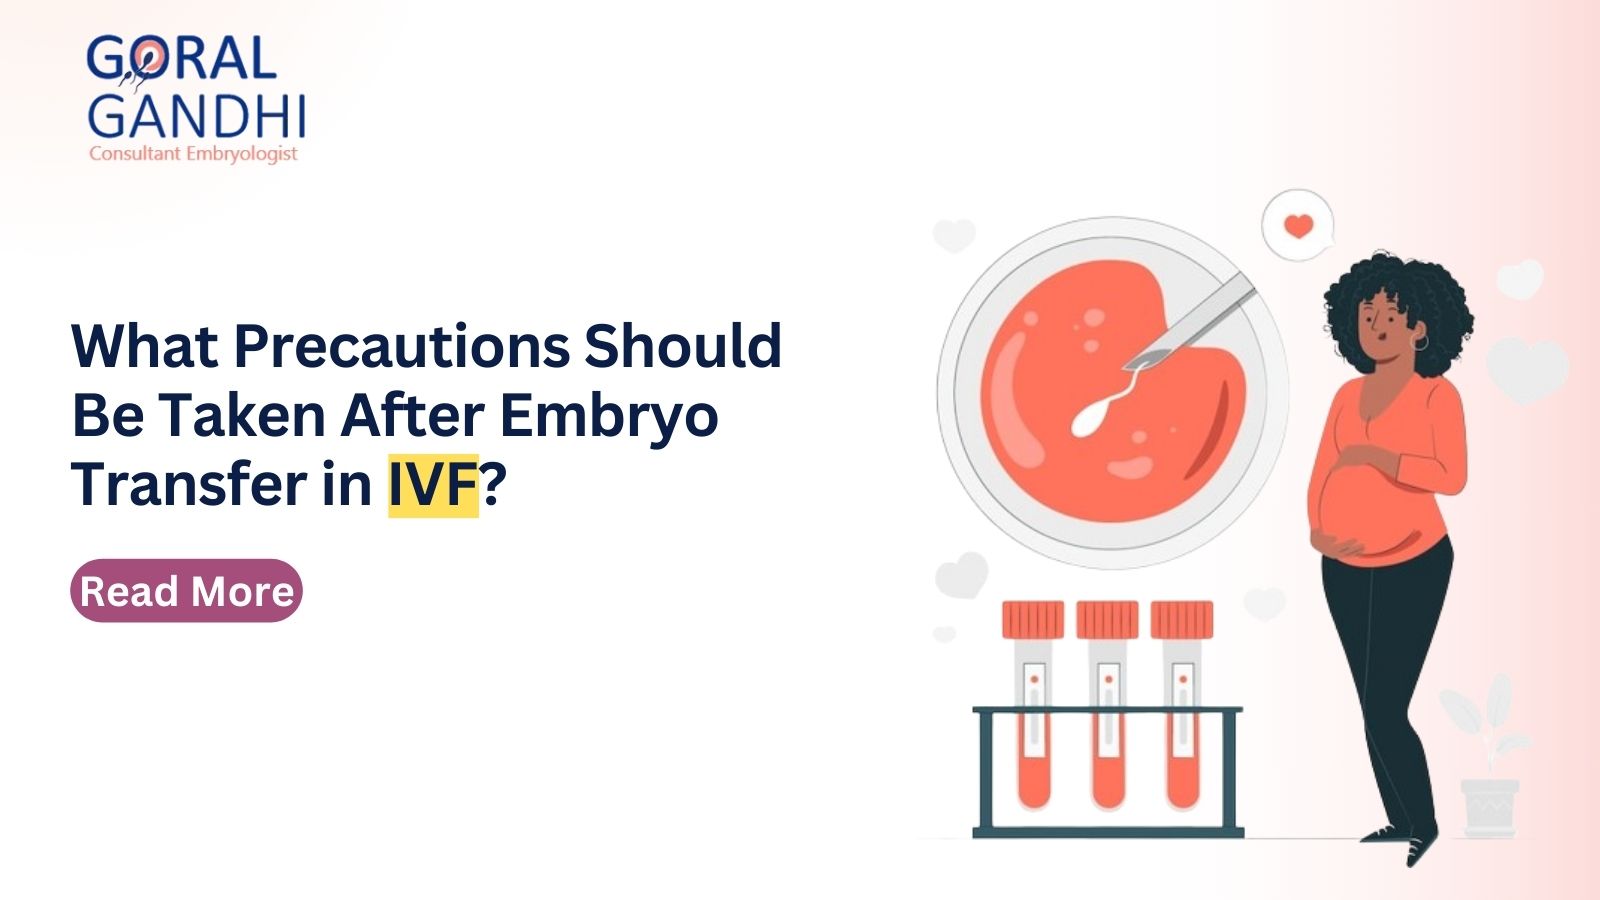 Essential steps to follow post embryo transfer in IVF 